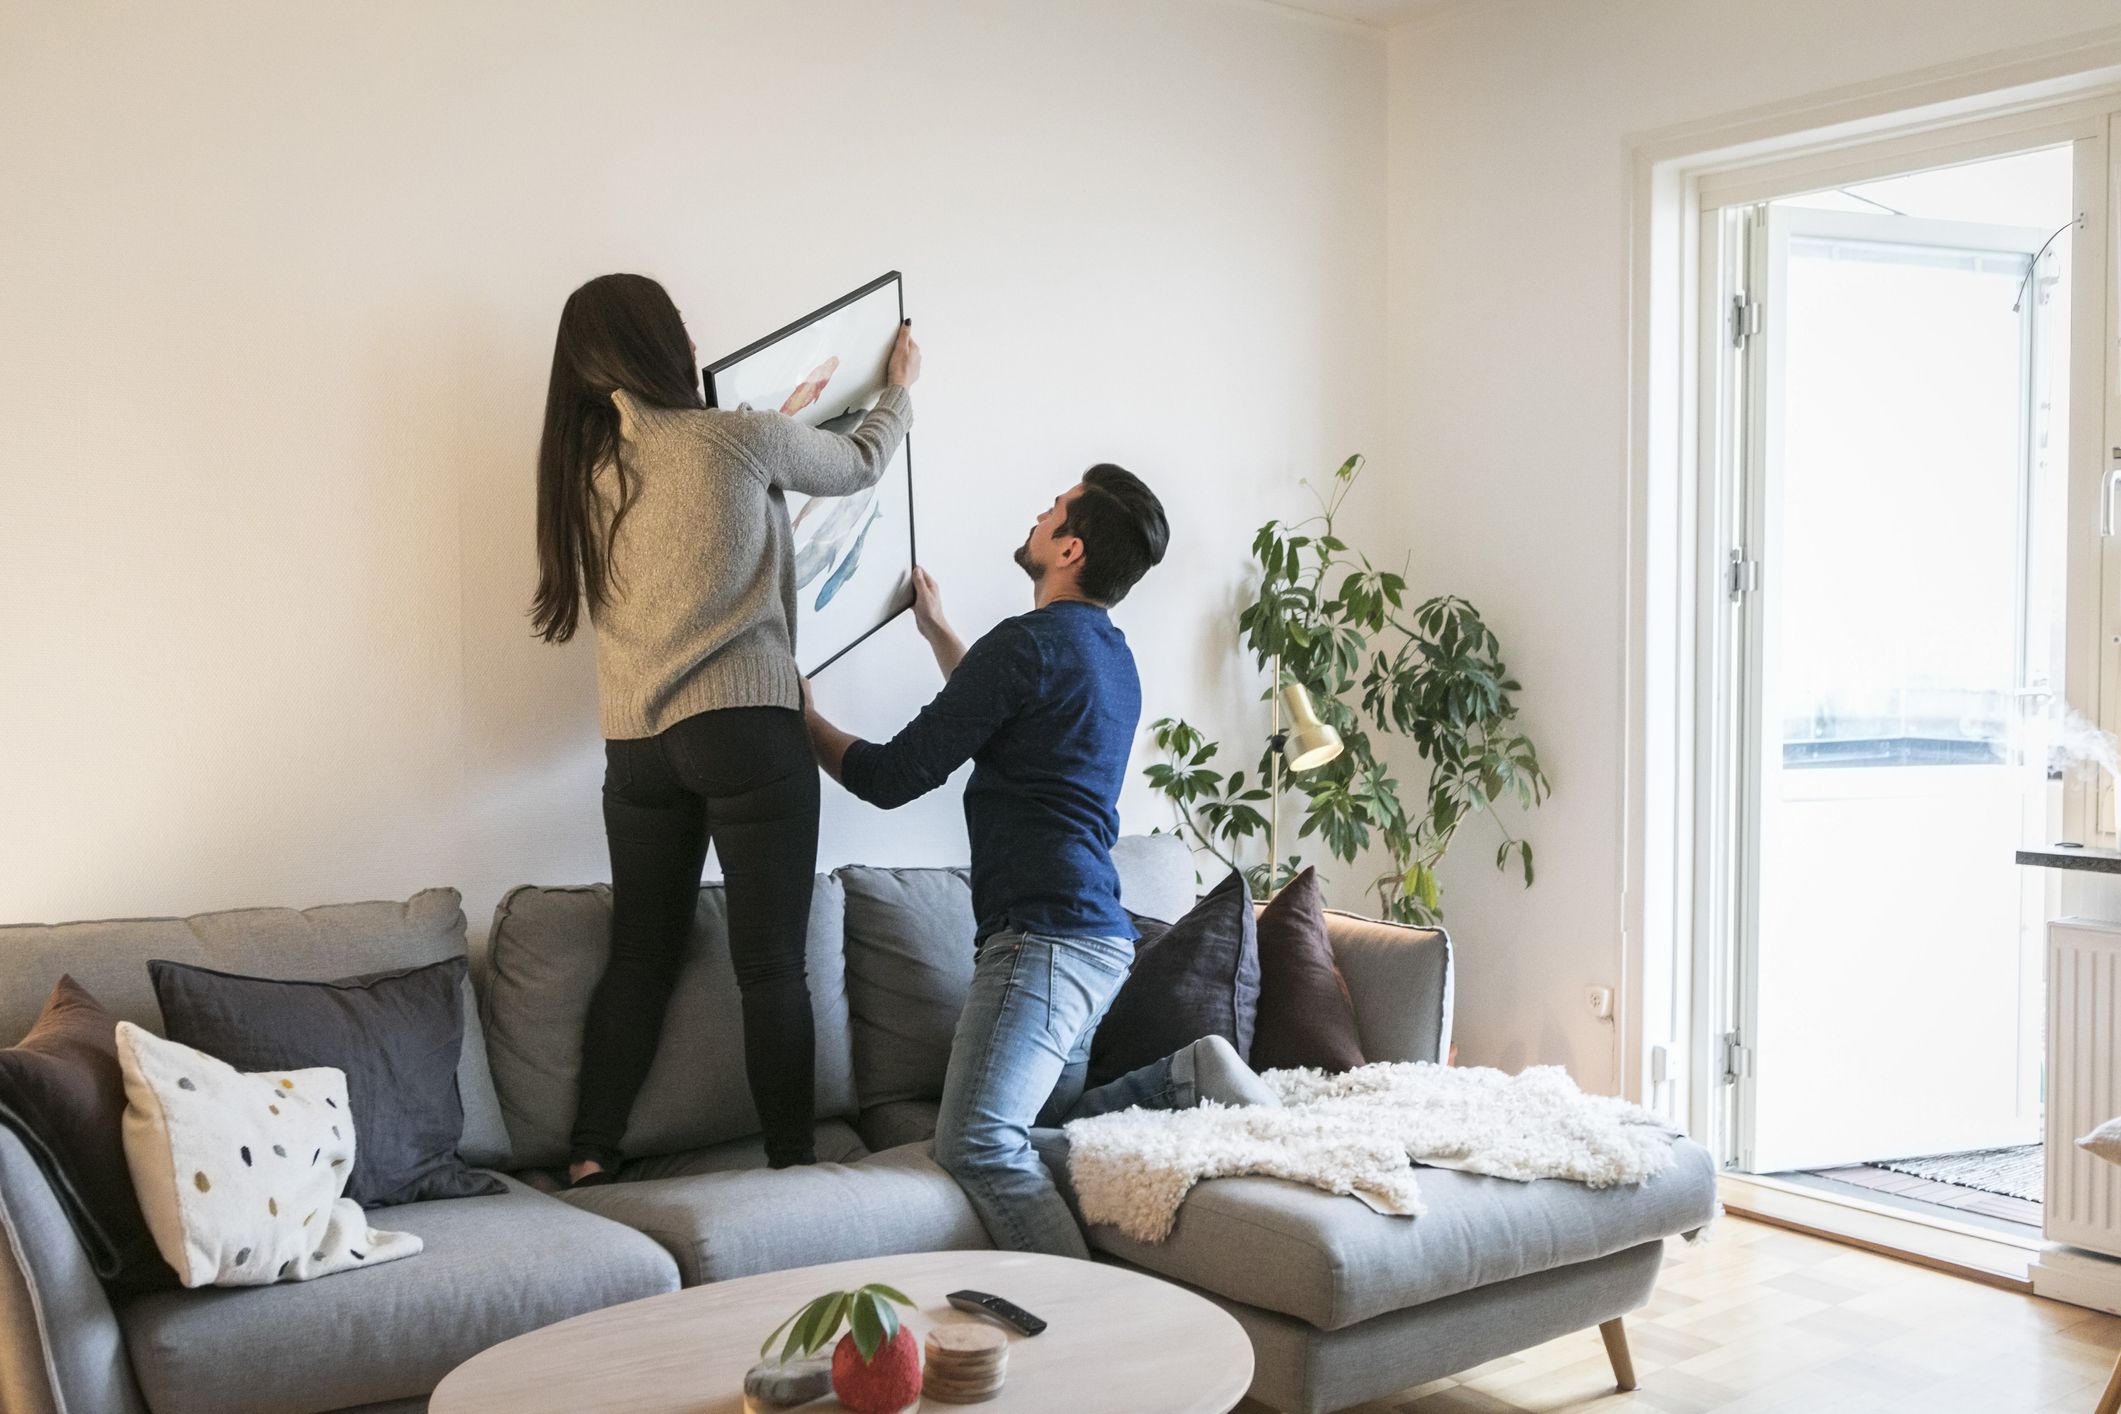 How to Decorate with Art - Designer Tips for Hanging Art